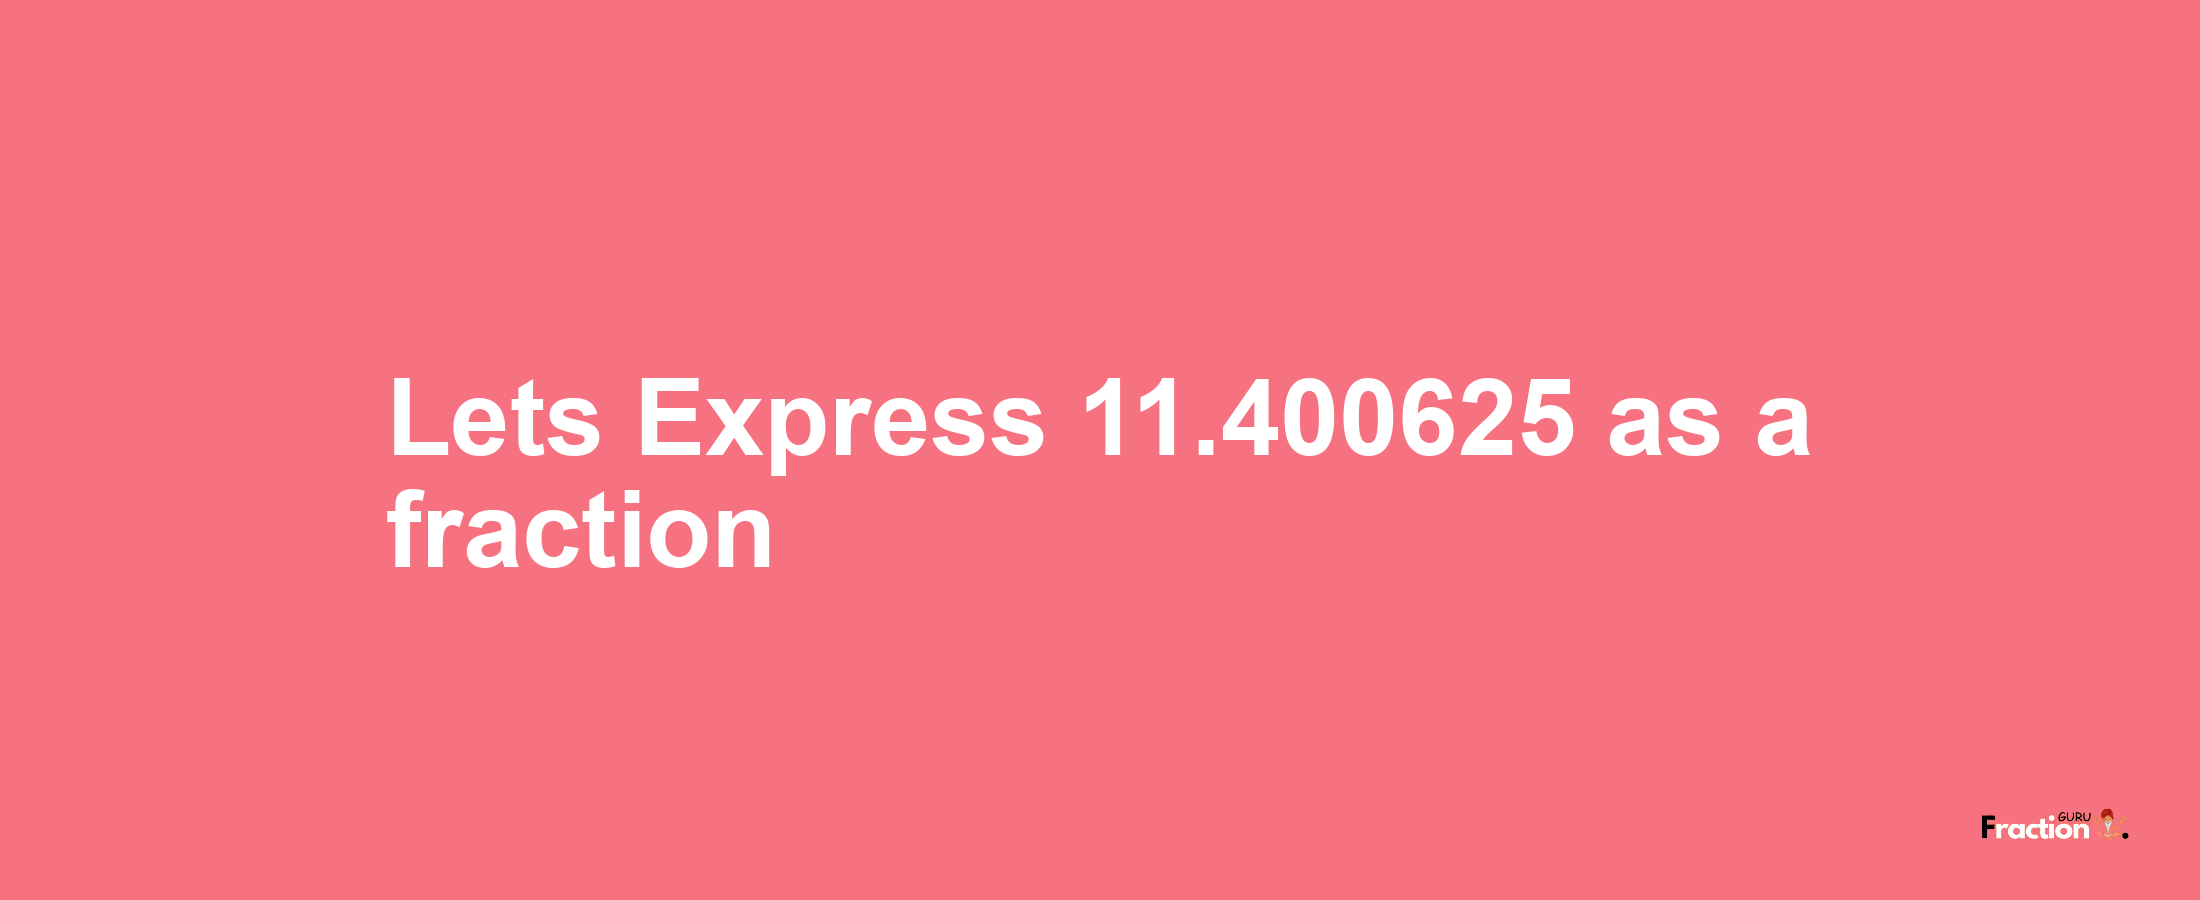 Lets Express 11.400625 as afraction